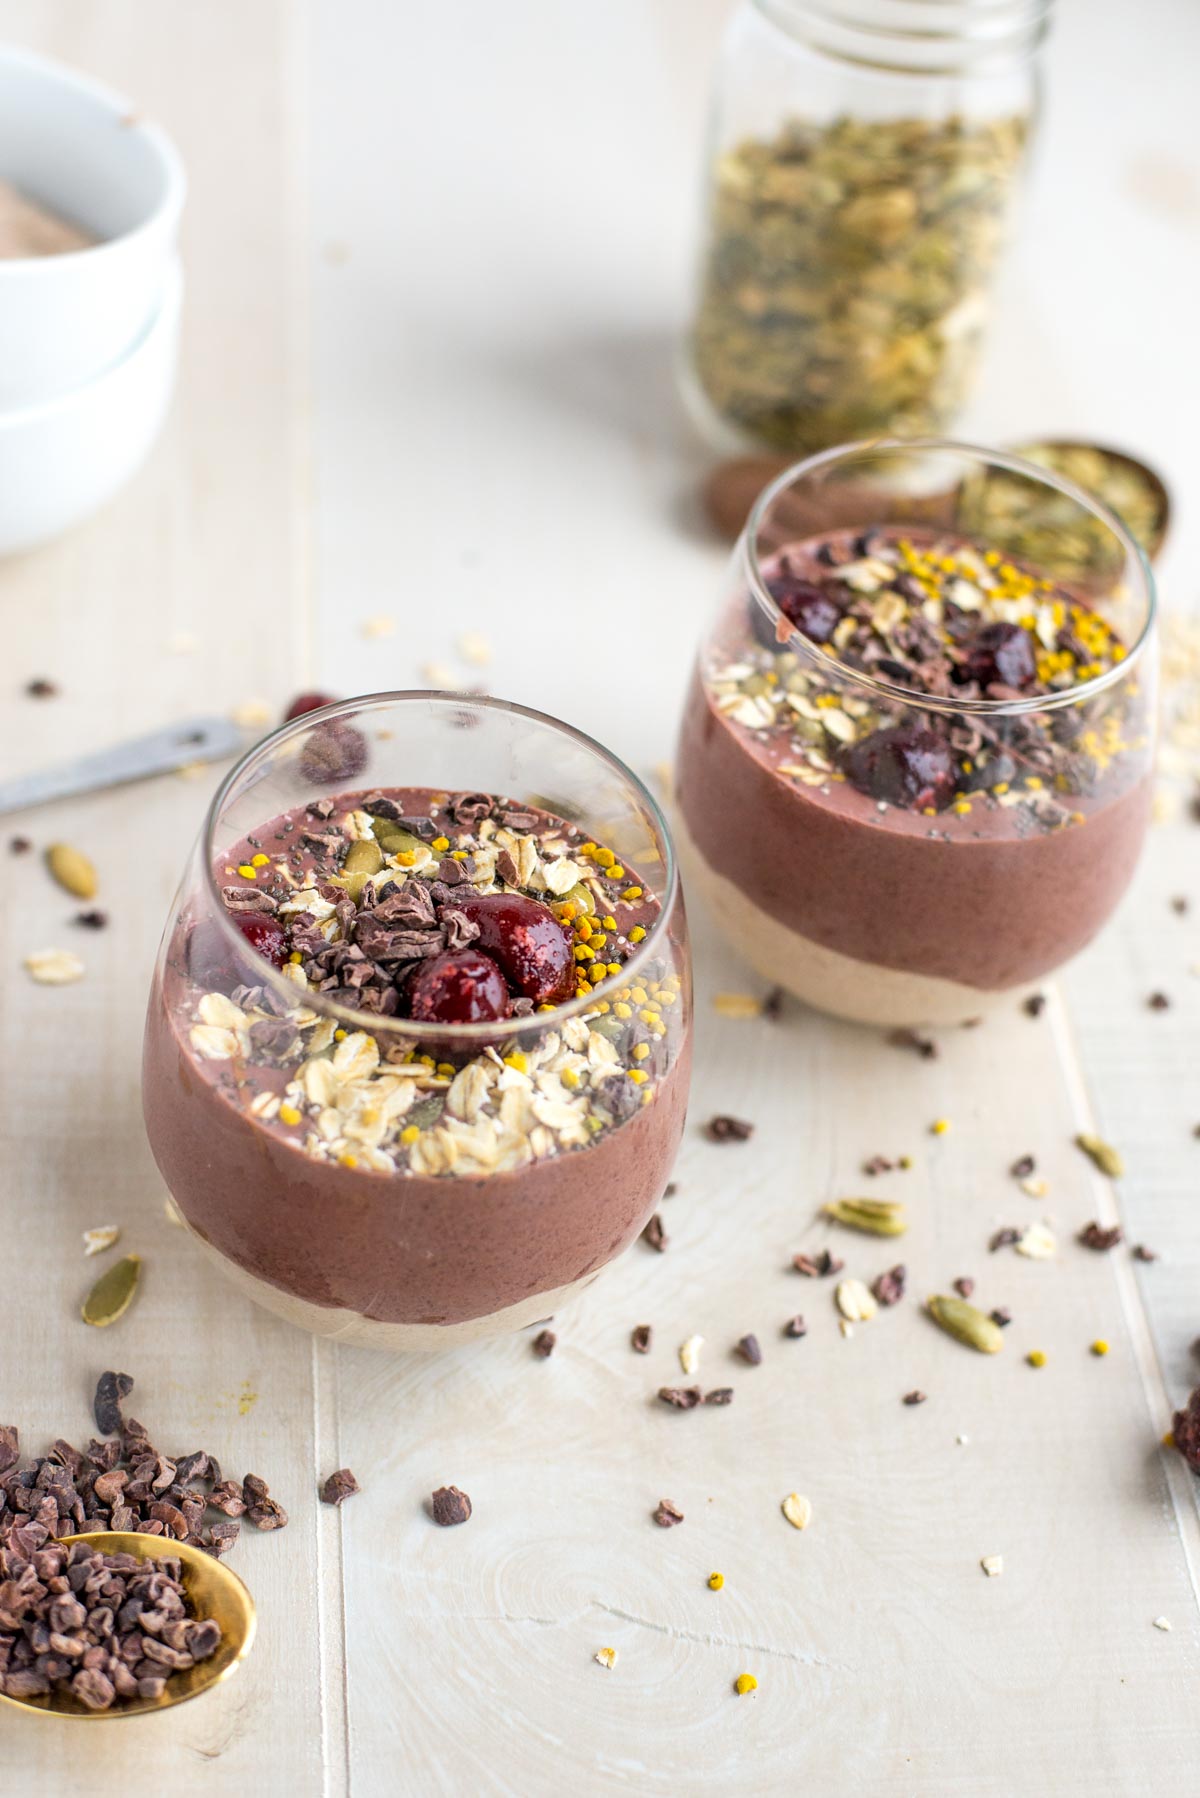 Do you think chocolate has health benefits? Find out here along with this recipe.